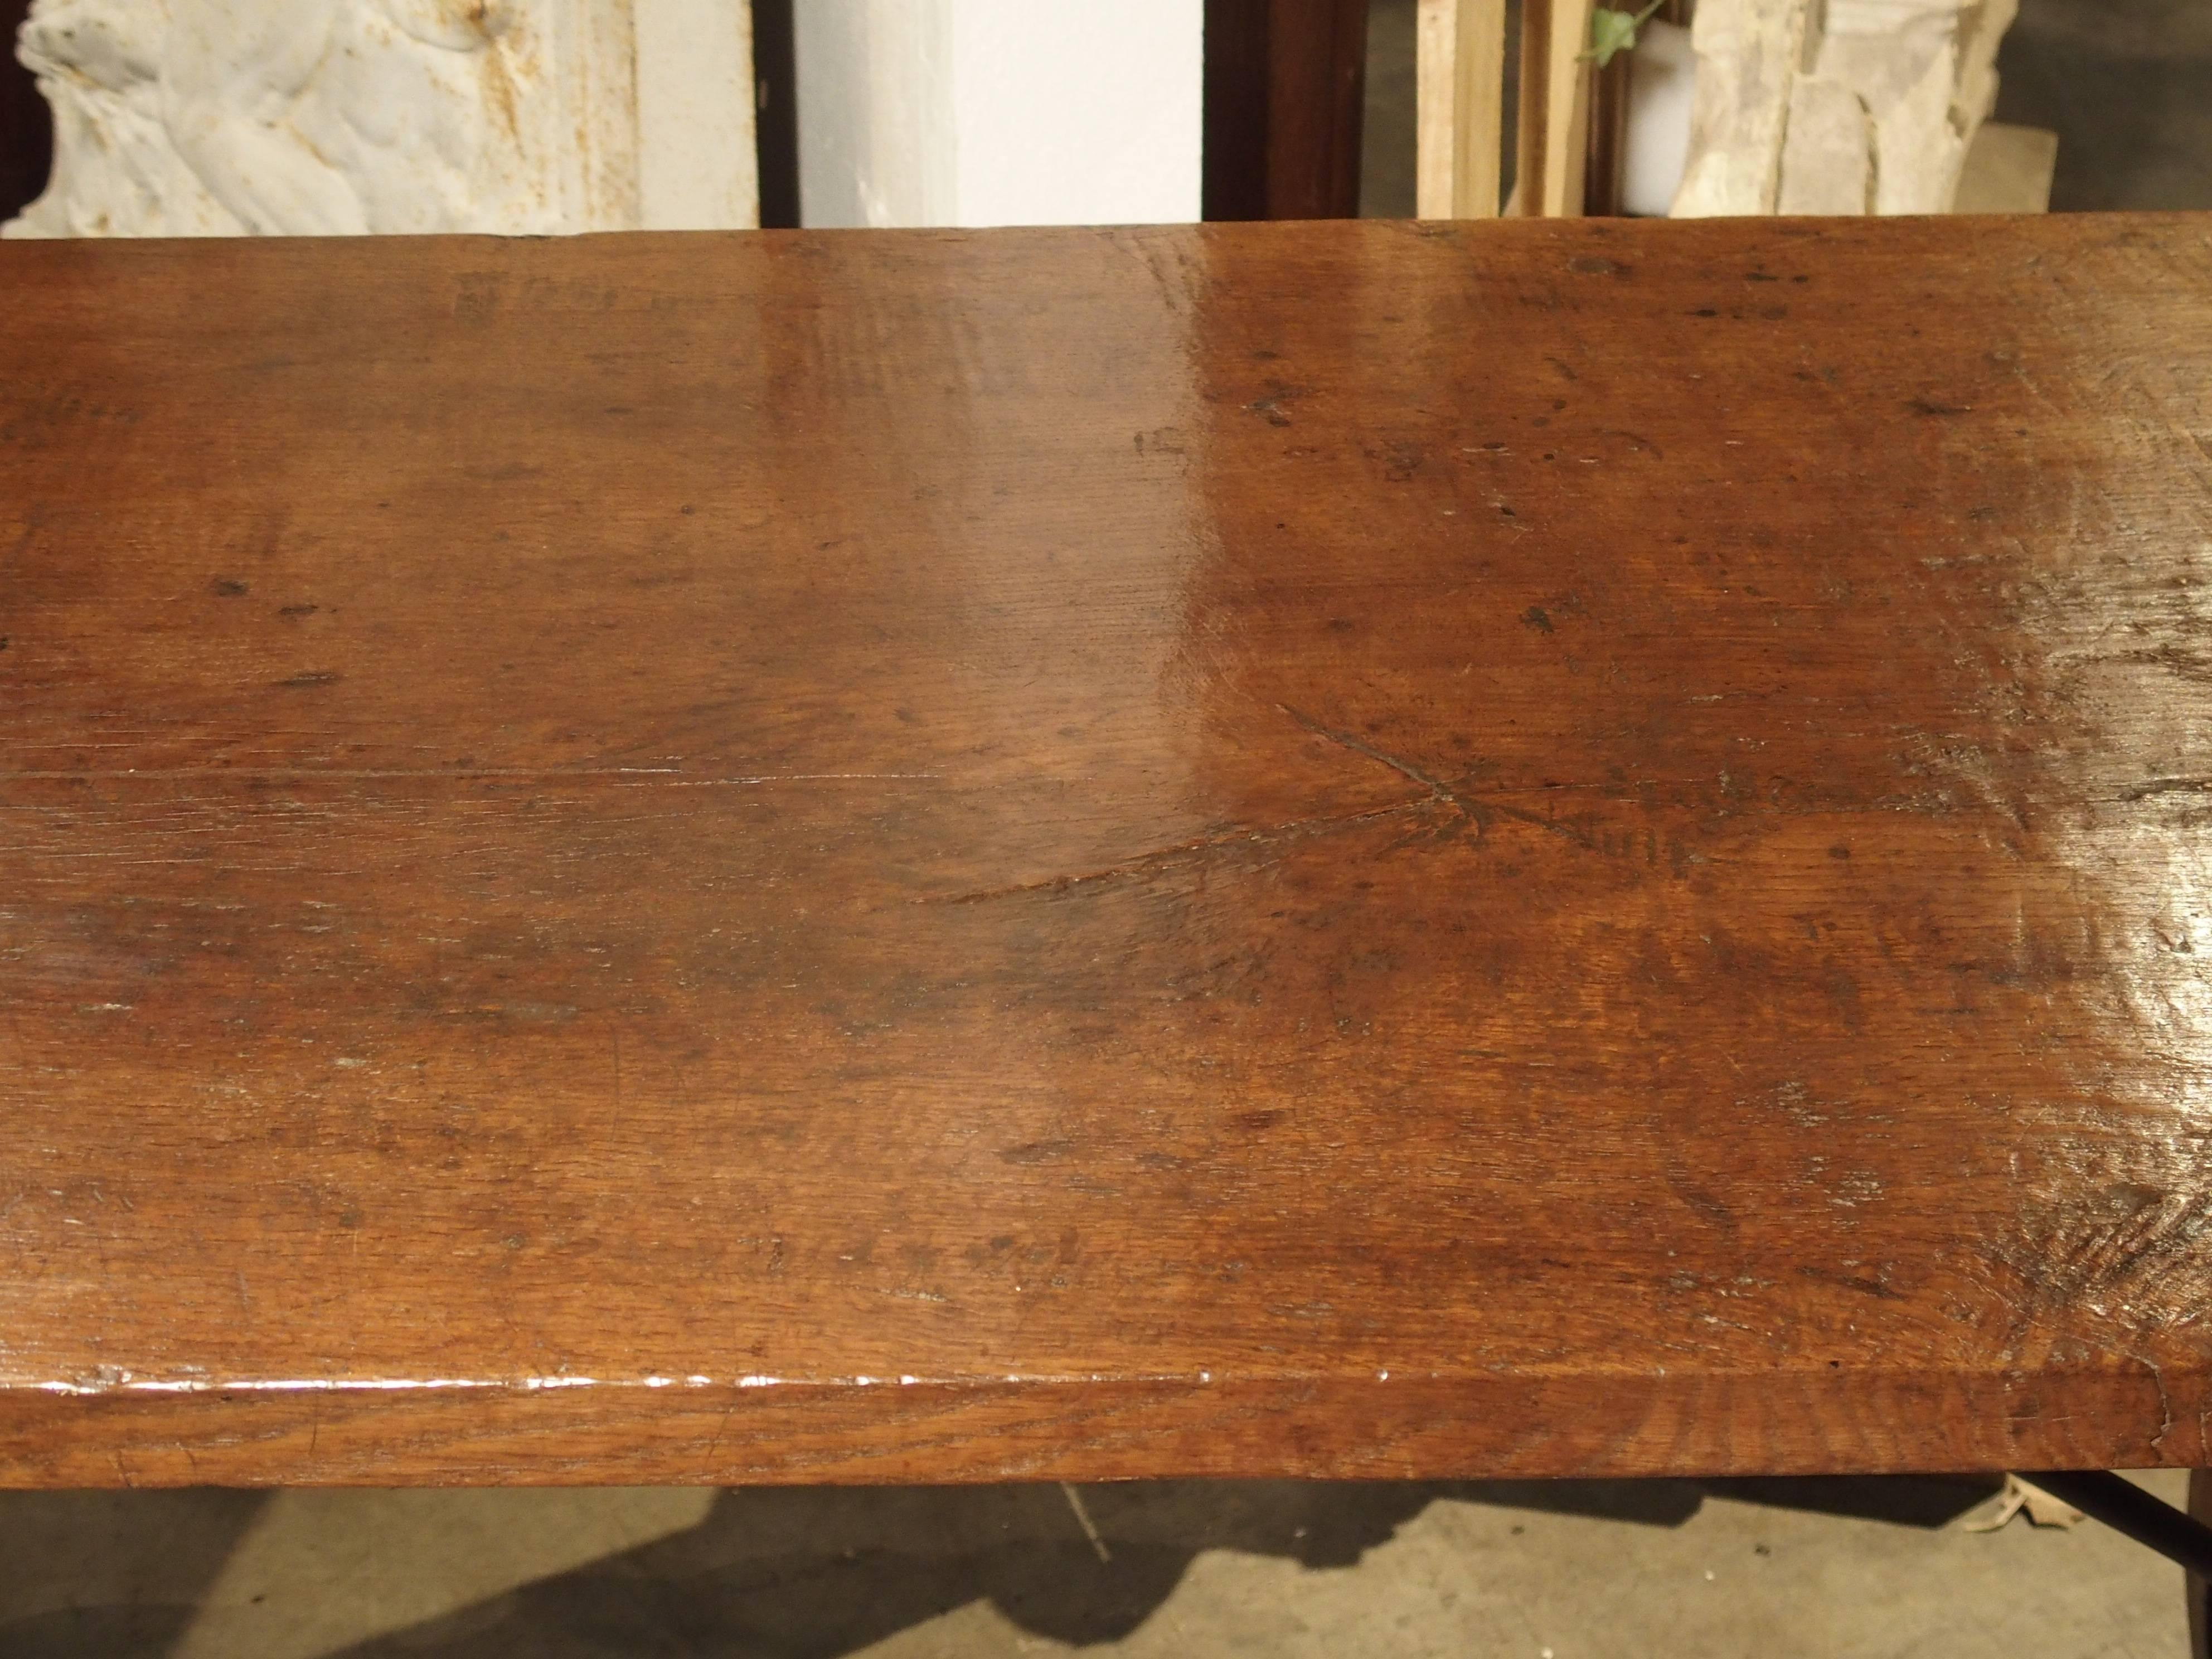 This rare walnut wood and oak 18th century refectory table from Spain has a top made from one single piece of wood. The overhang of the top allows for very comfortable seating at either end. The legs, more so than other tables of the same period,